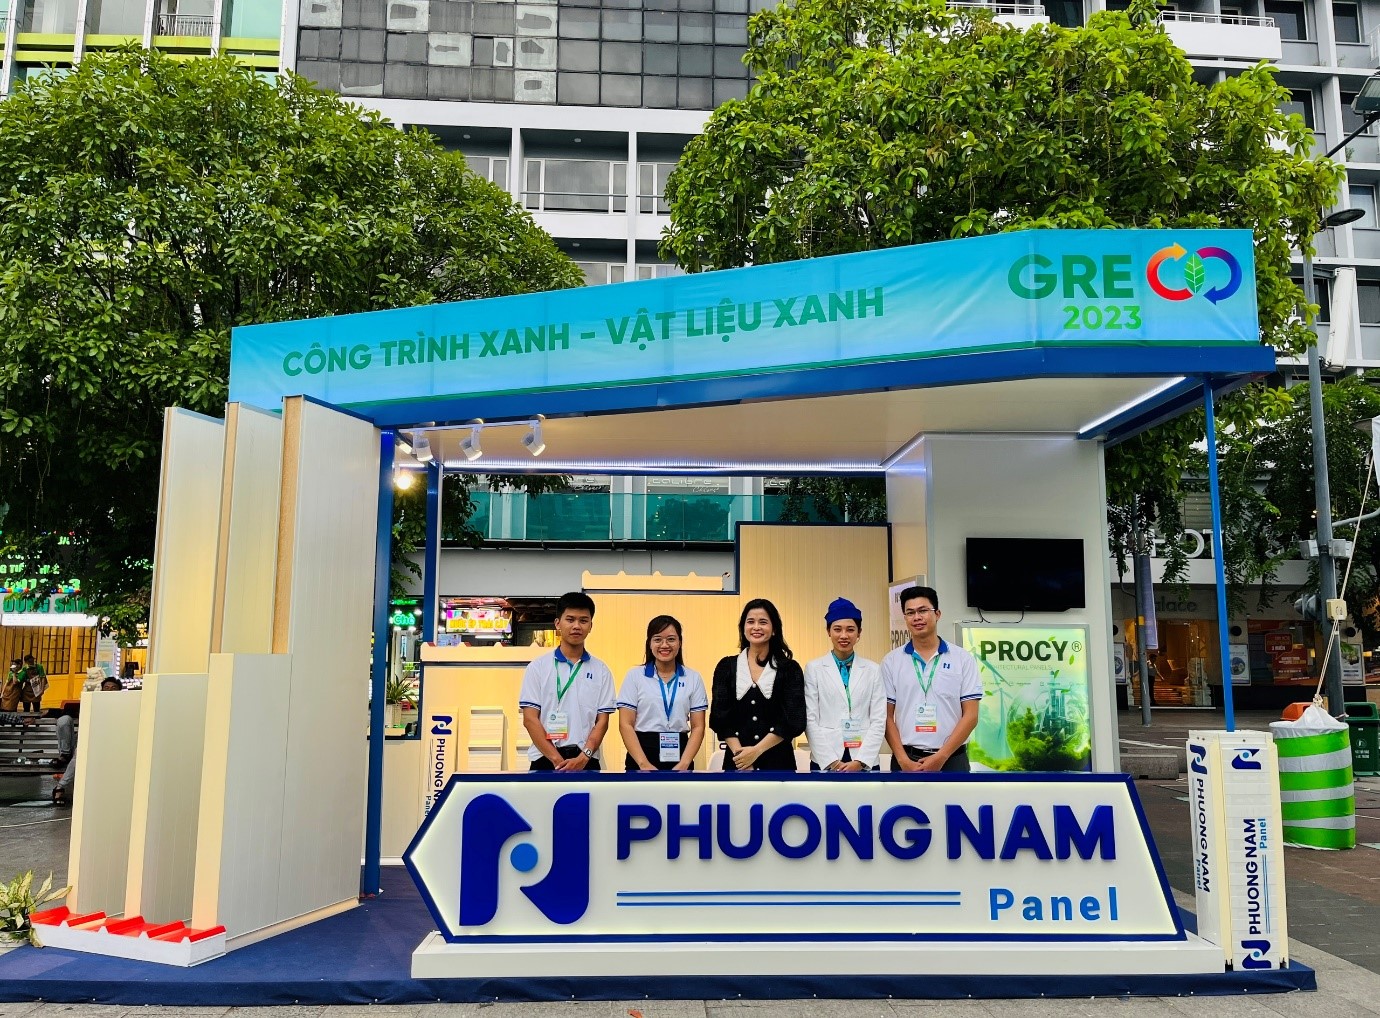 PHUONG NAM PANEL | GREENING THE FUTURE AT GREEN GROWTH SHOW 2023